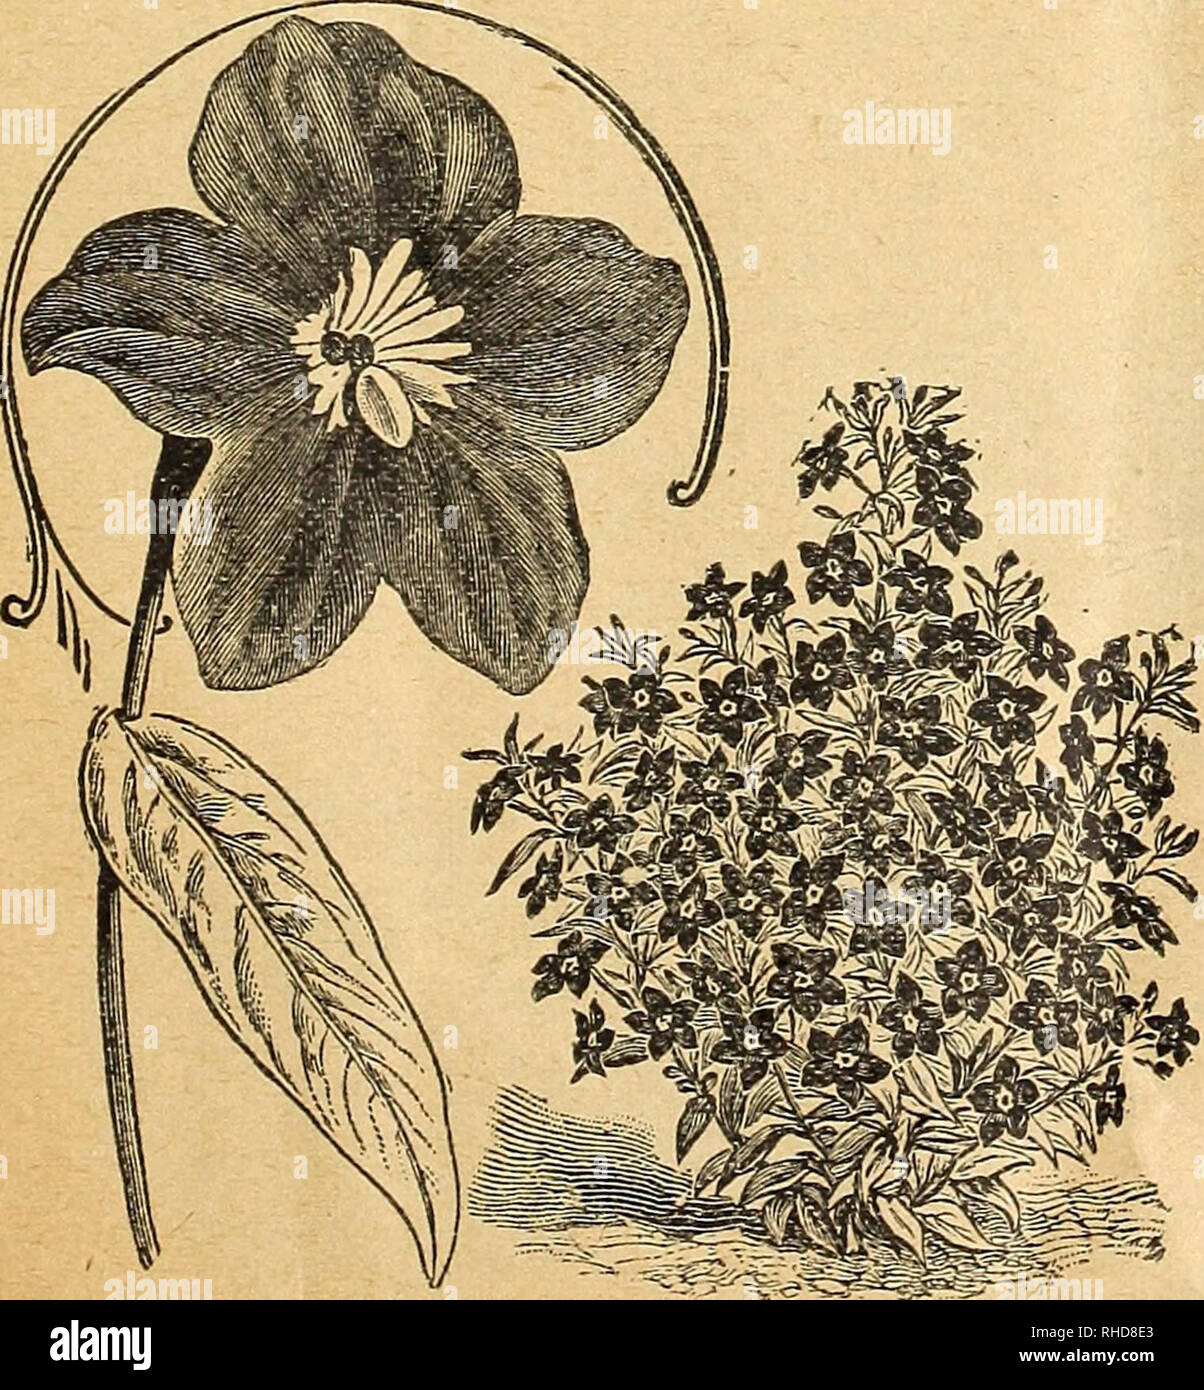 . Book of flowers from Miss Martha Hiser, seedswoman and florist. Seed industry and trade; Seeds; Flowers; Plants, Ornamental. ASPARAGUS SPRENGERI Aconitum â(Monkshood.) Free growing plants for bor- ders or windows. Hardy. Mixed colors, pkt 3 cts. Anemone Coronaria, Mixed âLarge, saucer-shaped flowers of many colors. Showy, hardy plants, pkt 3 cts. Arabis AlpinaâOne of the earliest of all Spring flowers; spreading tufts with pure white flowers, pkt 5 cts. Asparagus SprengeriâOne of the best plants to grow in suspended baskets, for greenhouse or for out doors in the Sum- mer. The fronds frequen Stock Photo